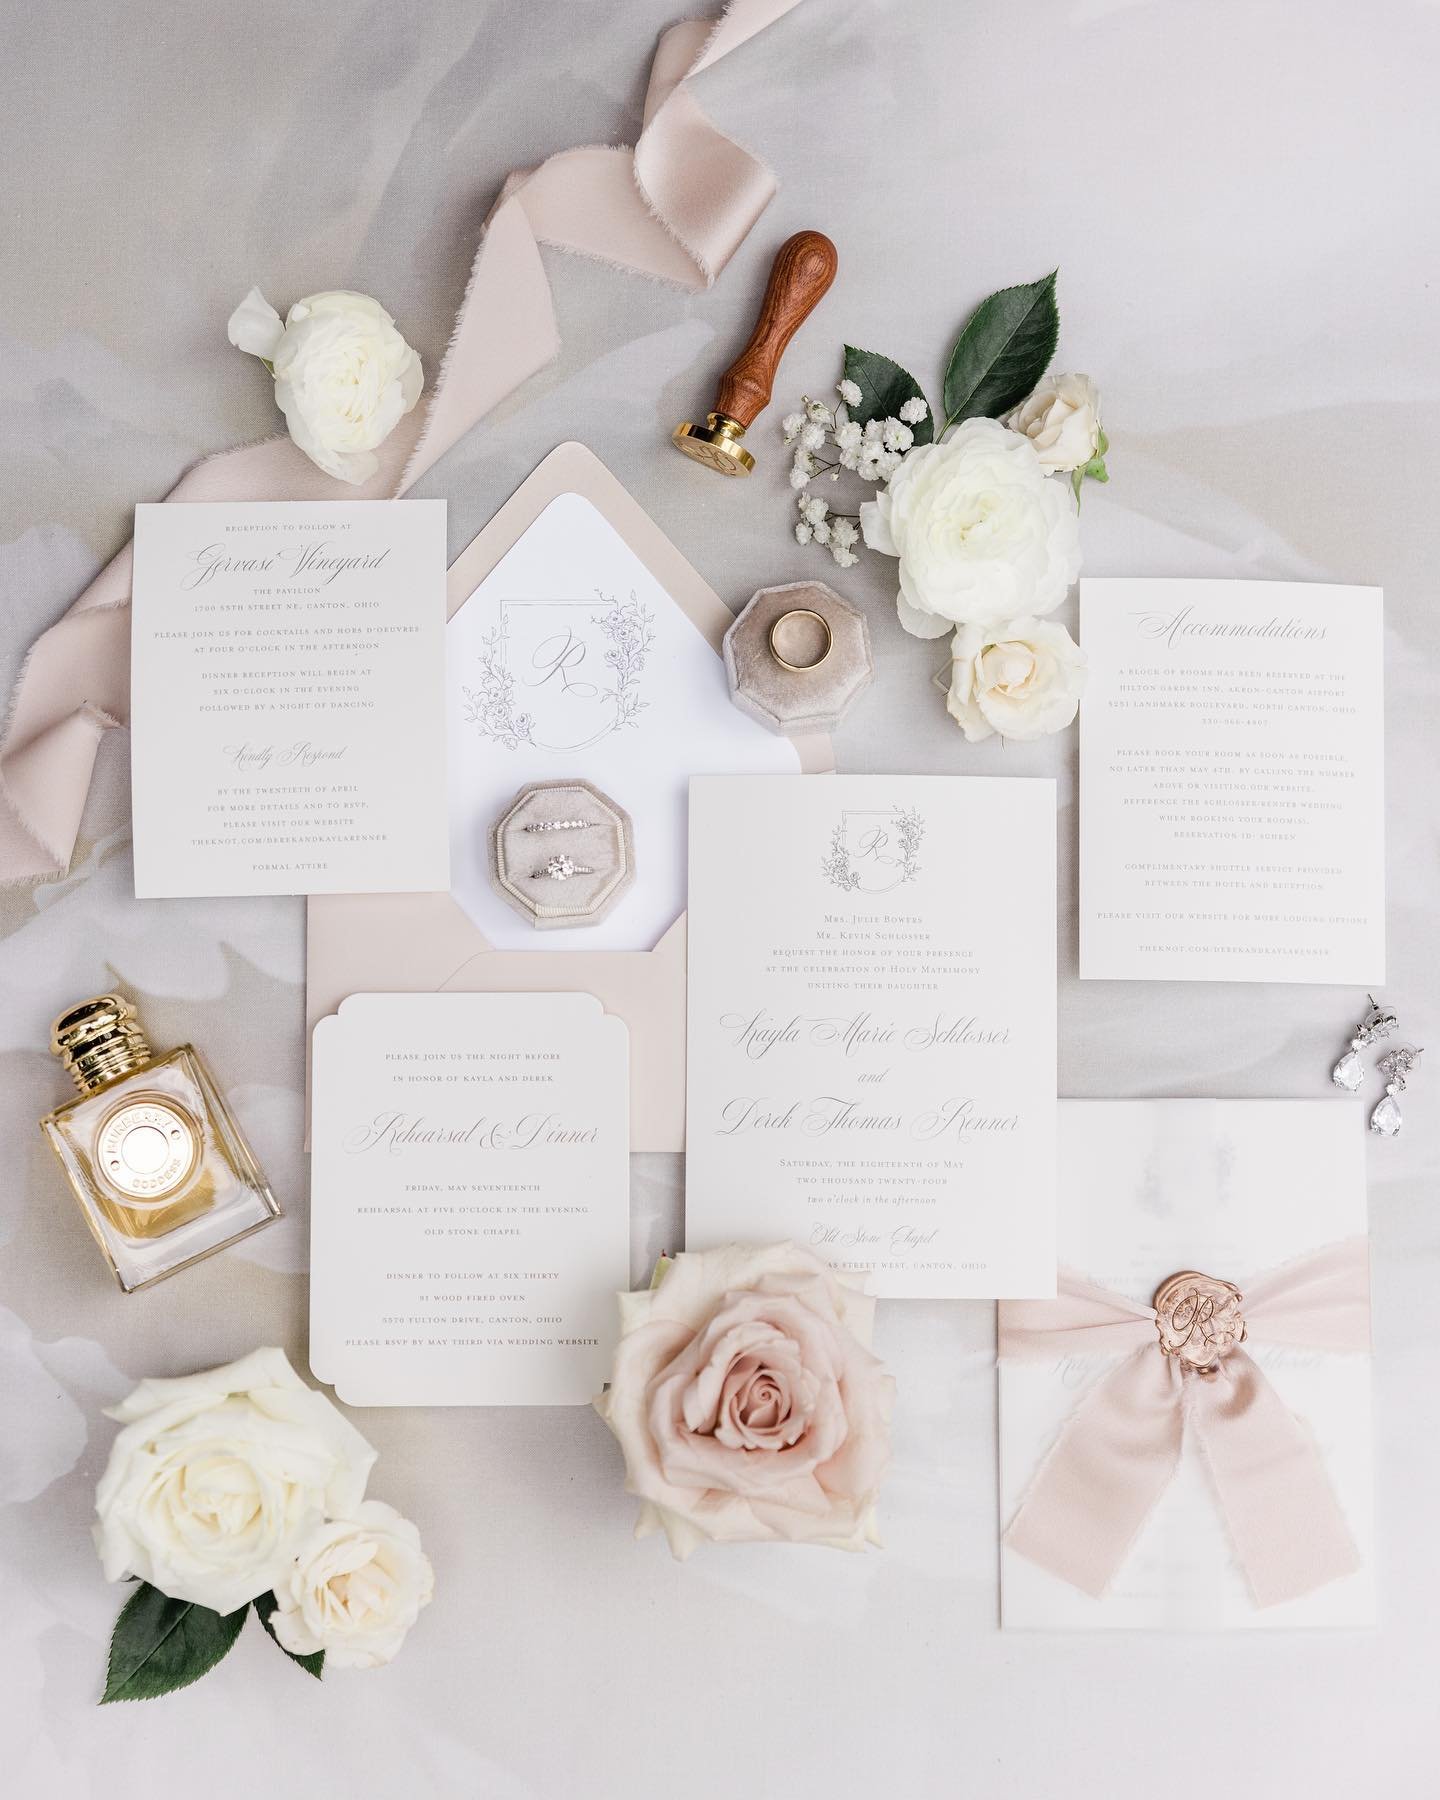 Your invitation suite is a glimpse into your entire wedding day aesthetic. It&rsquo;s the teaser your guests will get to experience before the wedding day is here. 

And then I get to photograph it to tell the full story of your day from ✨start✨ to f